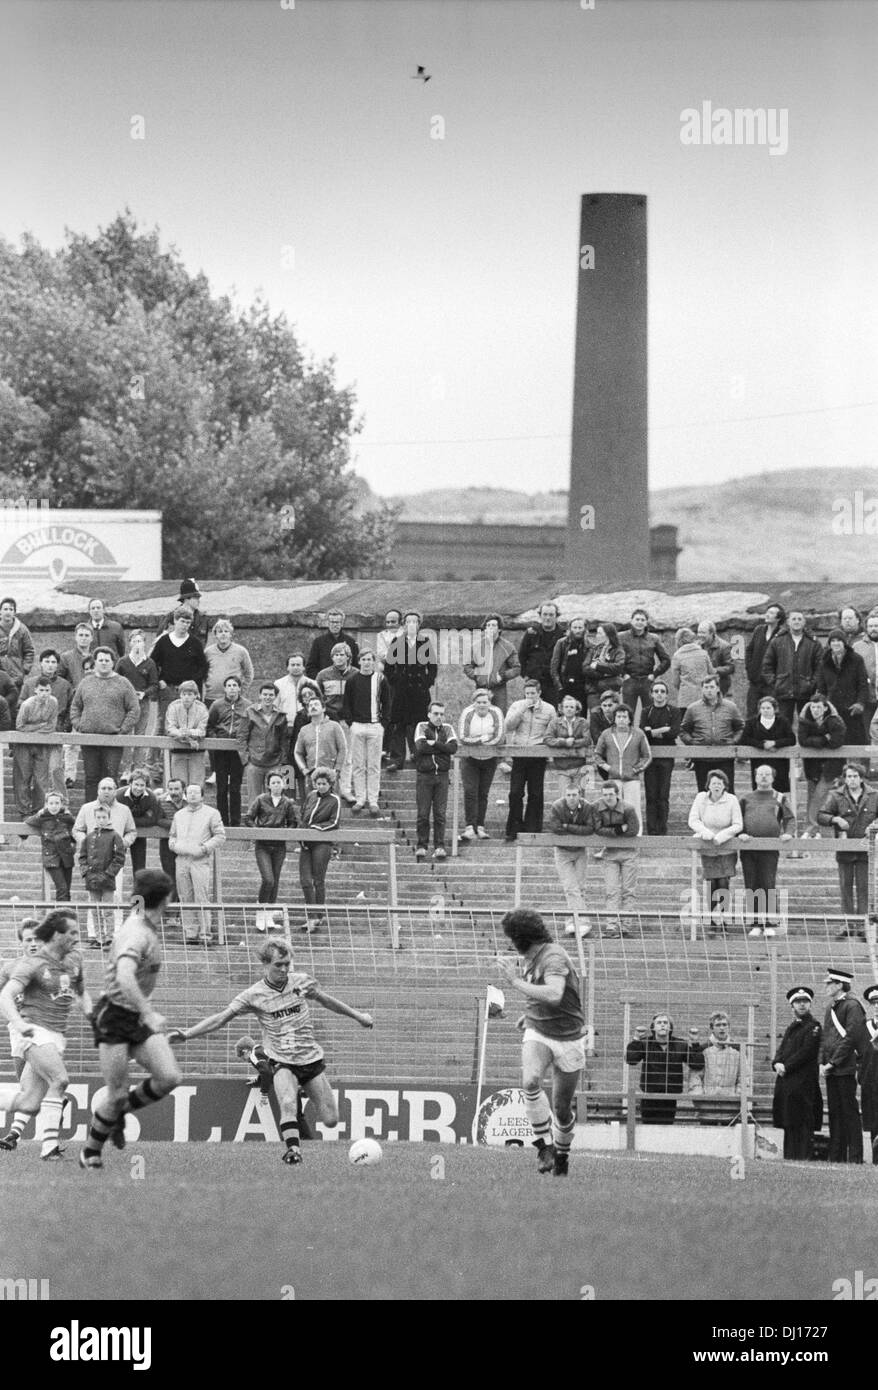 OLDHAM ATHLETIC V WOLVERHAMPTON WANDERERS AT BOUNDARY PARK 13/10/84 Wolves fans on the terraces. Picture by DAVID BAGNALL Stock Photo